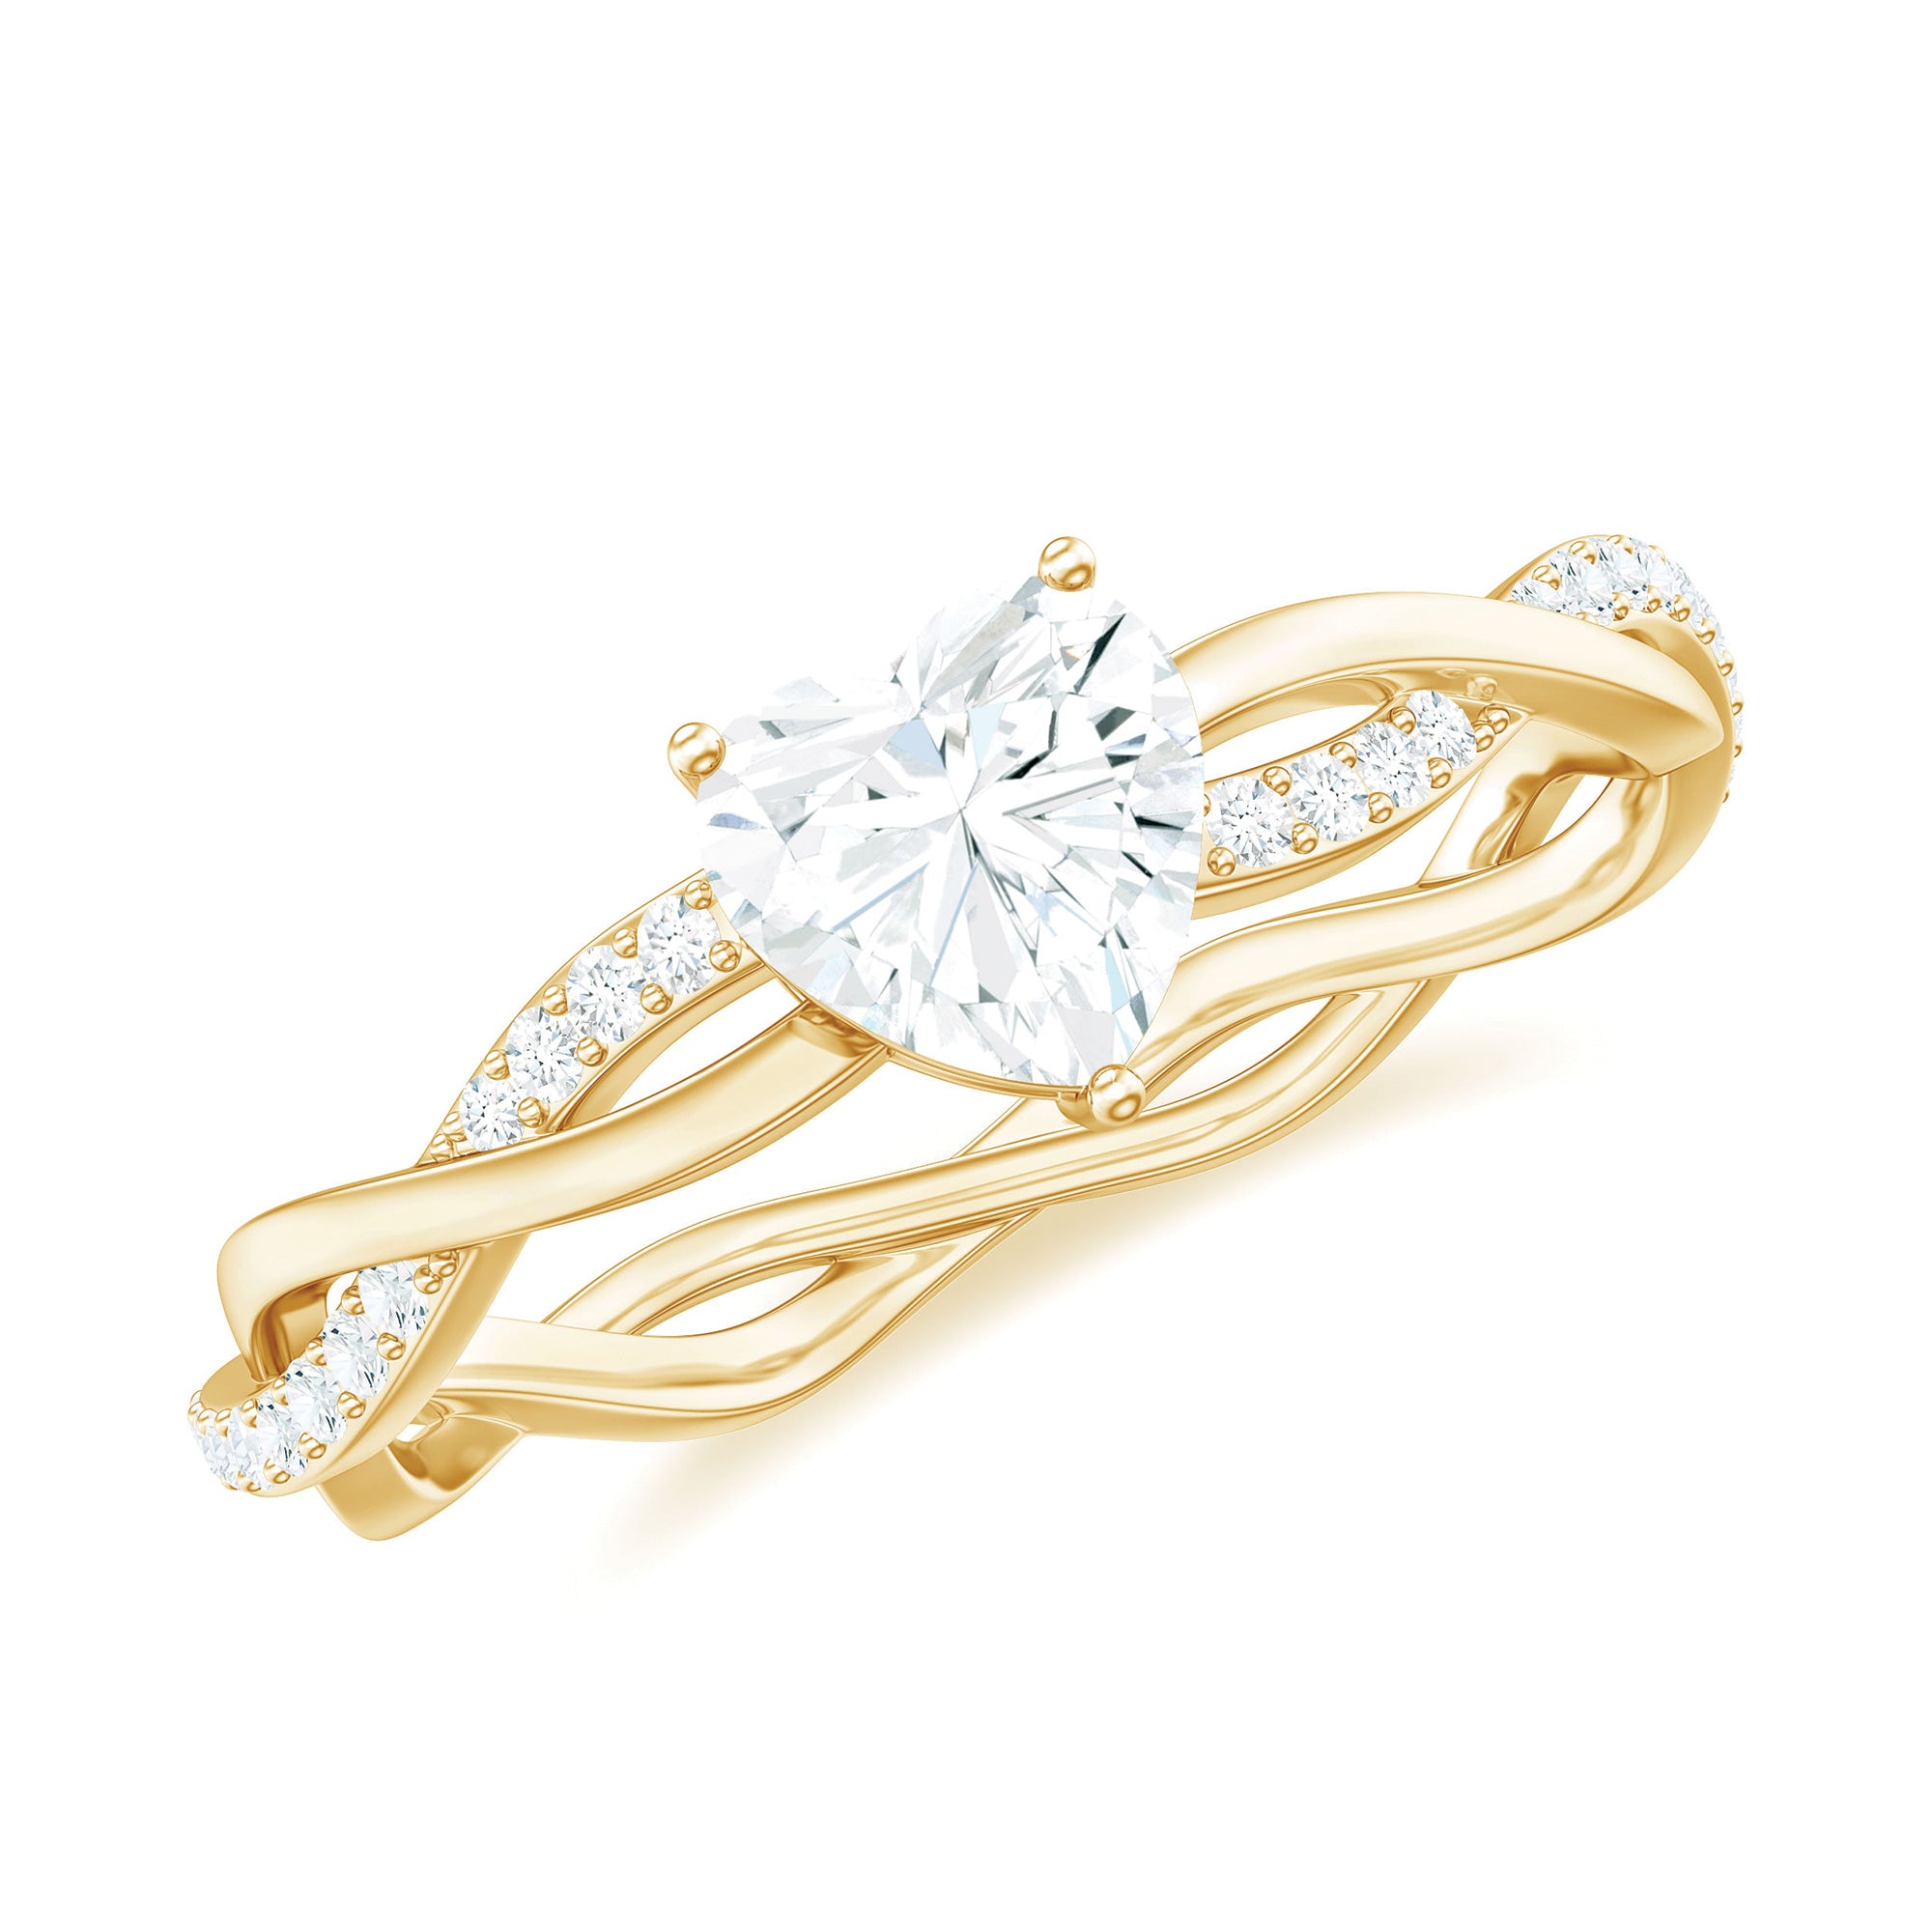 Heart Shape Moissanite Solitaire Braided Promise Ring Moissanite - ( D-VS1 ) - Color and Clarity - Rosec Jewels